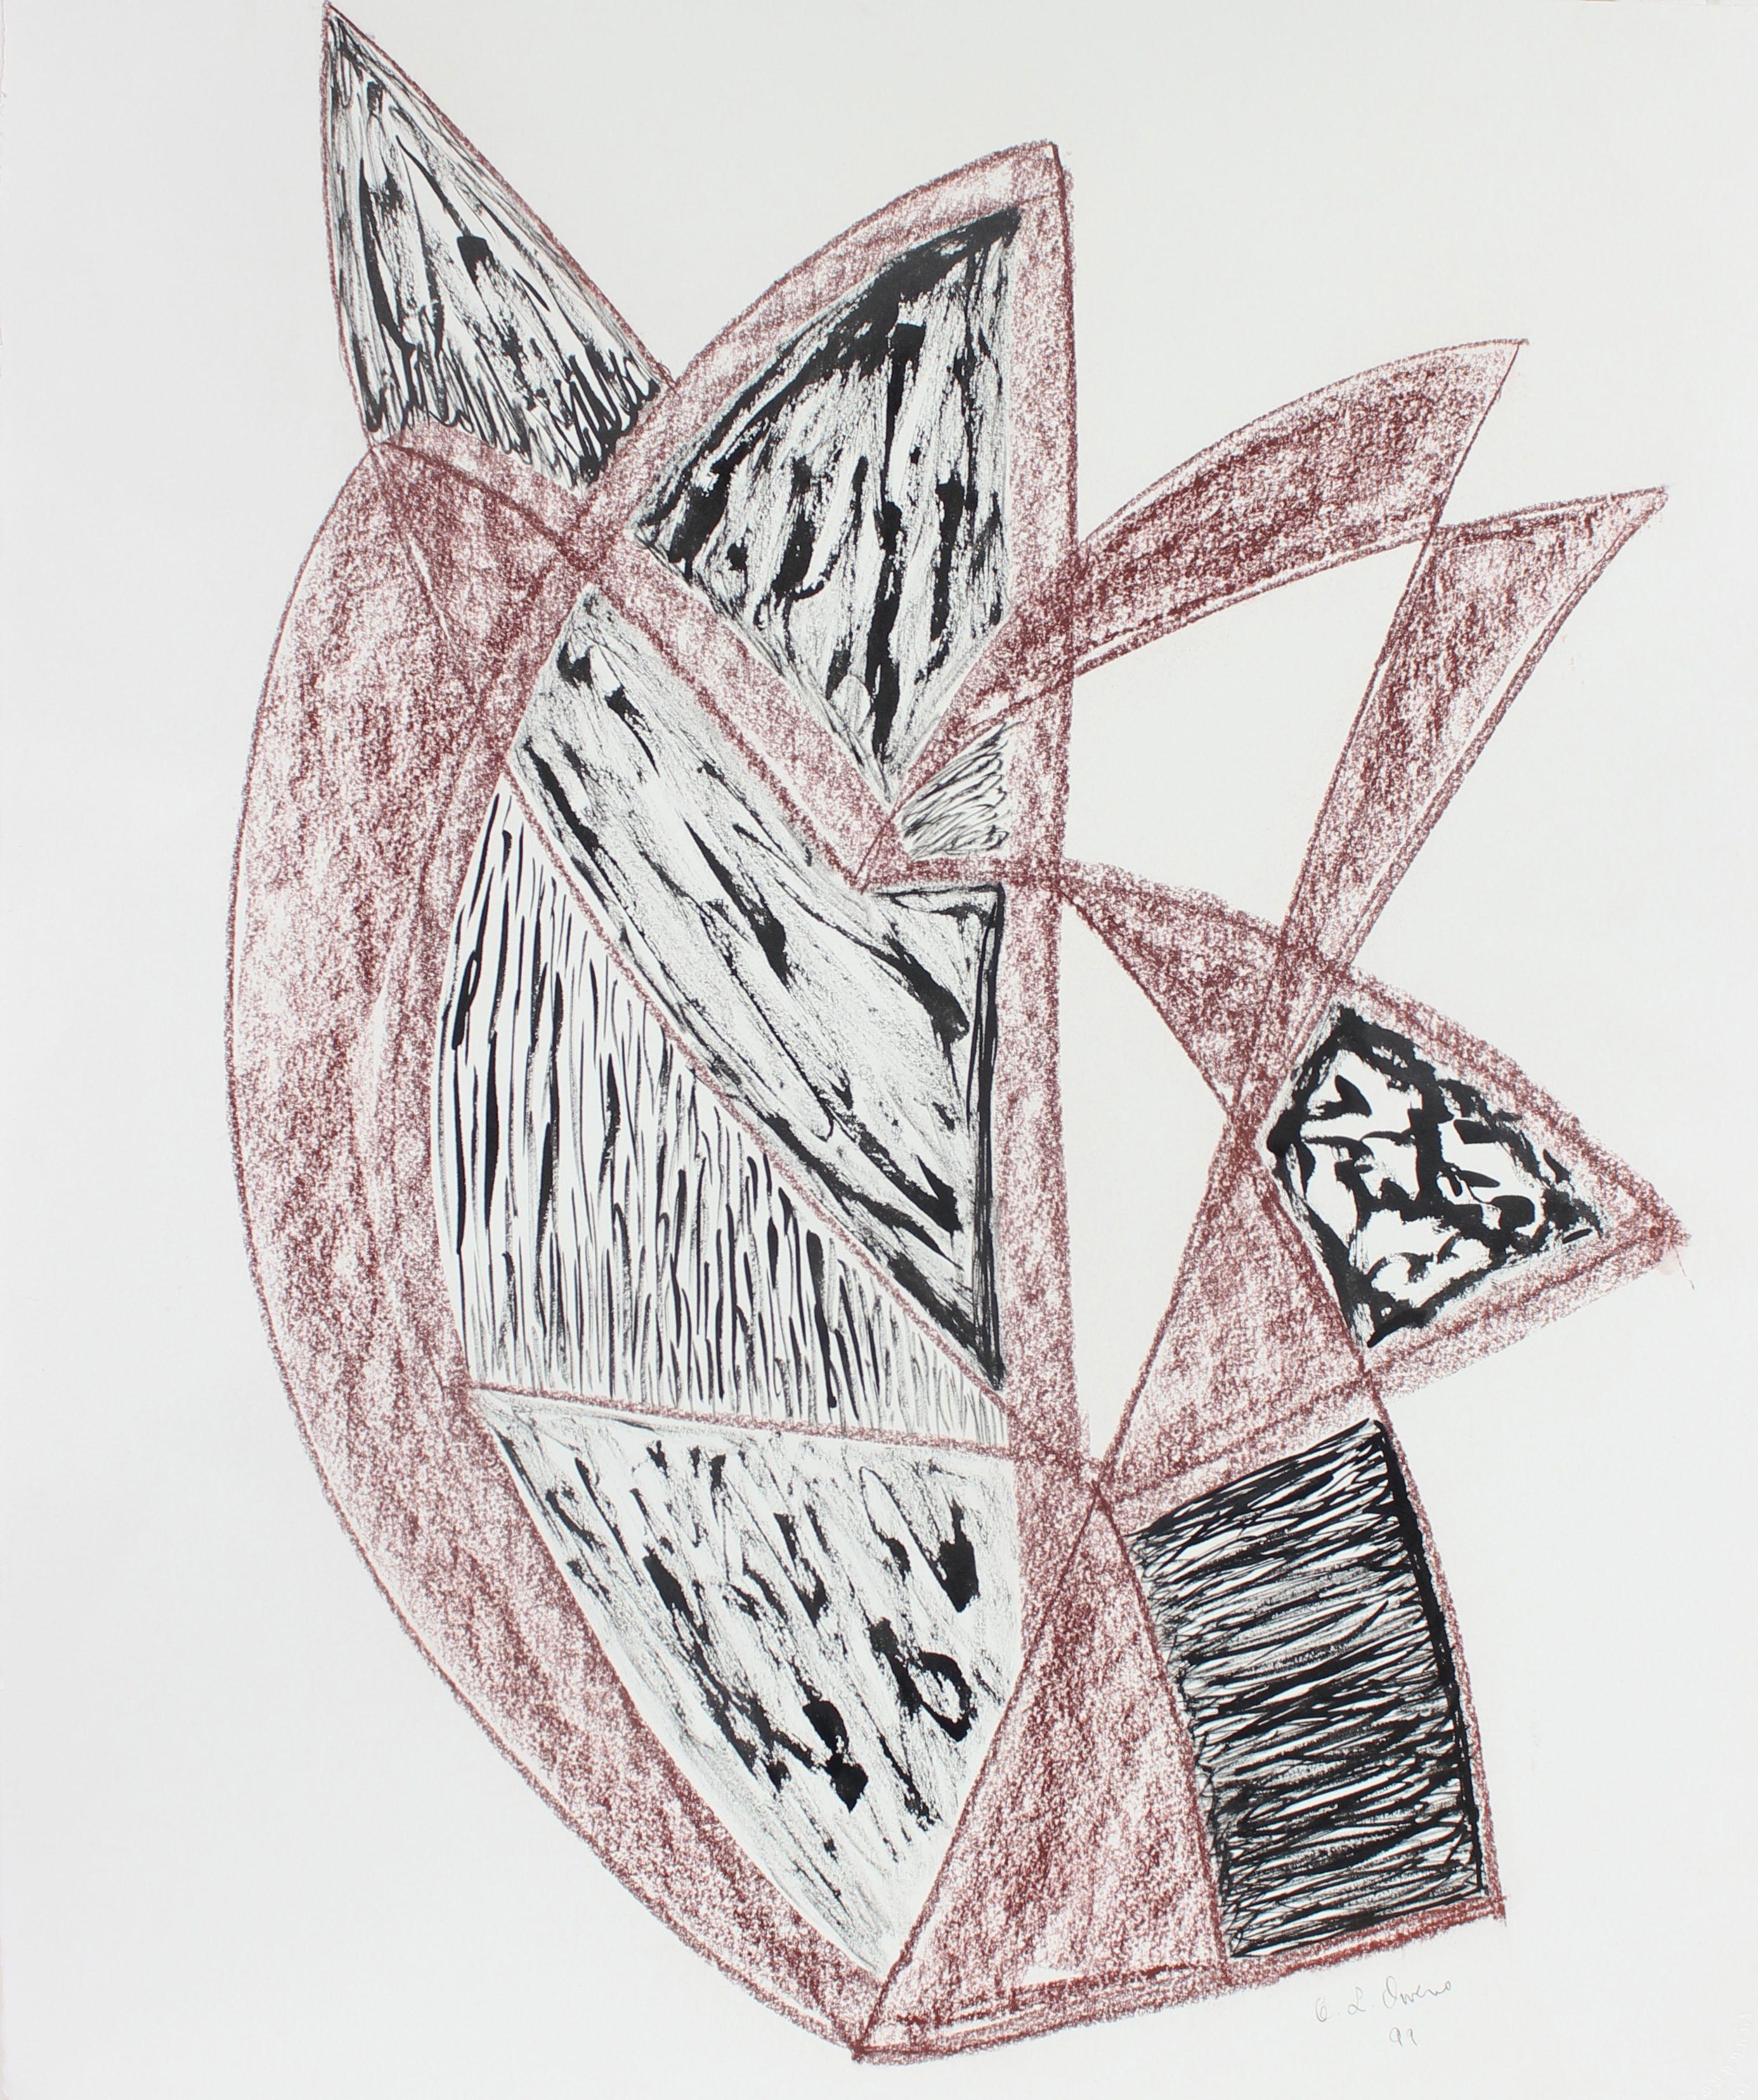 Georgette London Owens Abstract Drawing - Red & Black Angular Abstract 1999 Ink & Pastel Drawing